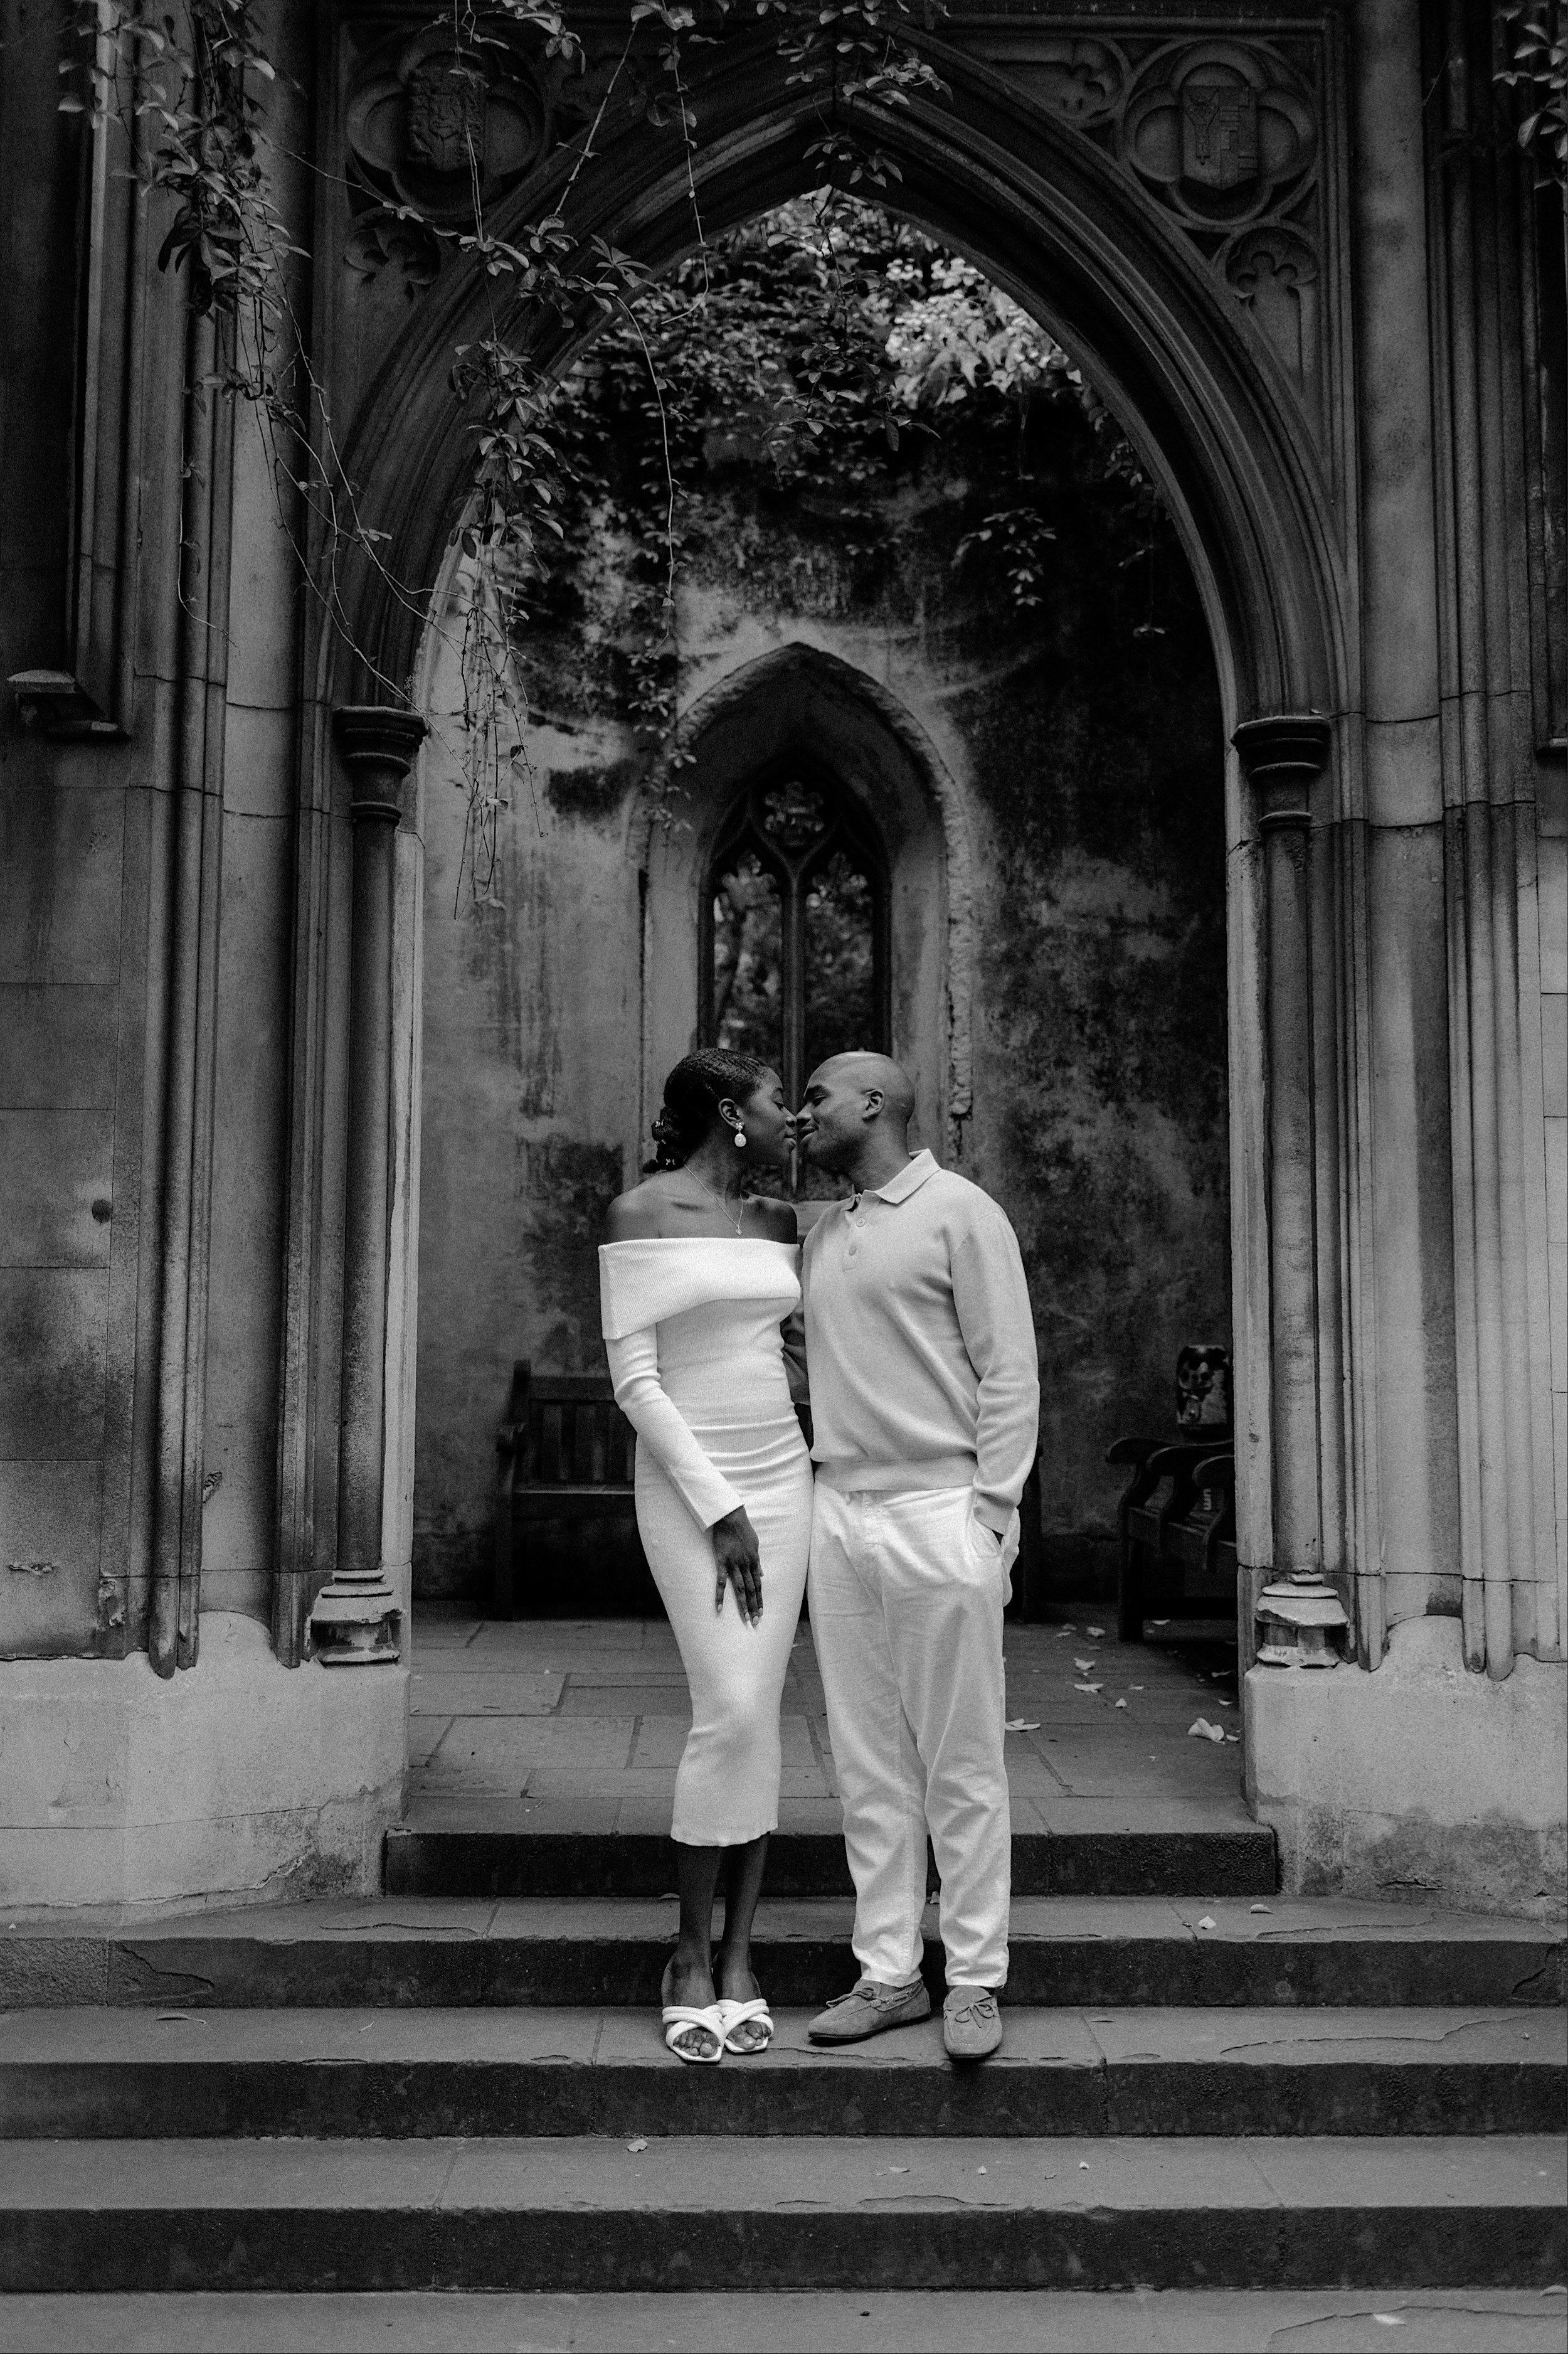 17_St-Dunstans-in-the-east-pre-wedding-shoot0022_Gorgeous black couple in love share a intimate moment in st dunstan in the east.jpg